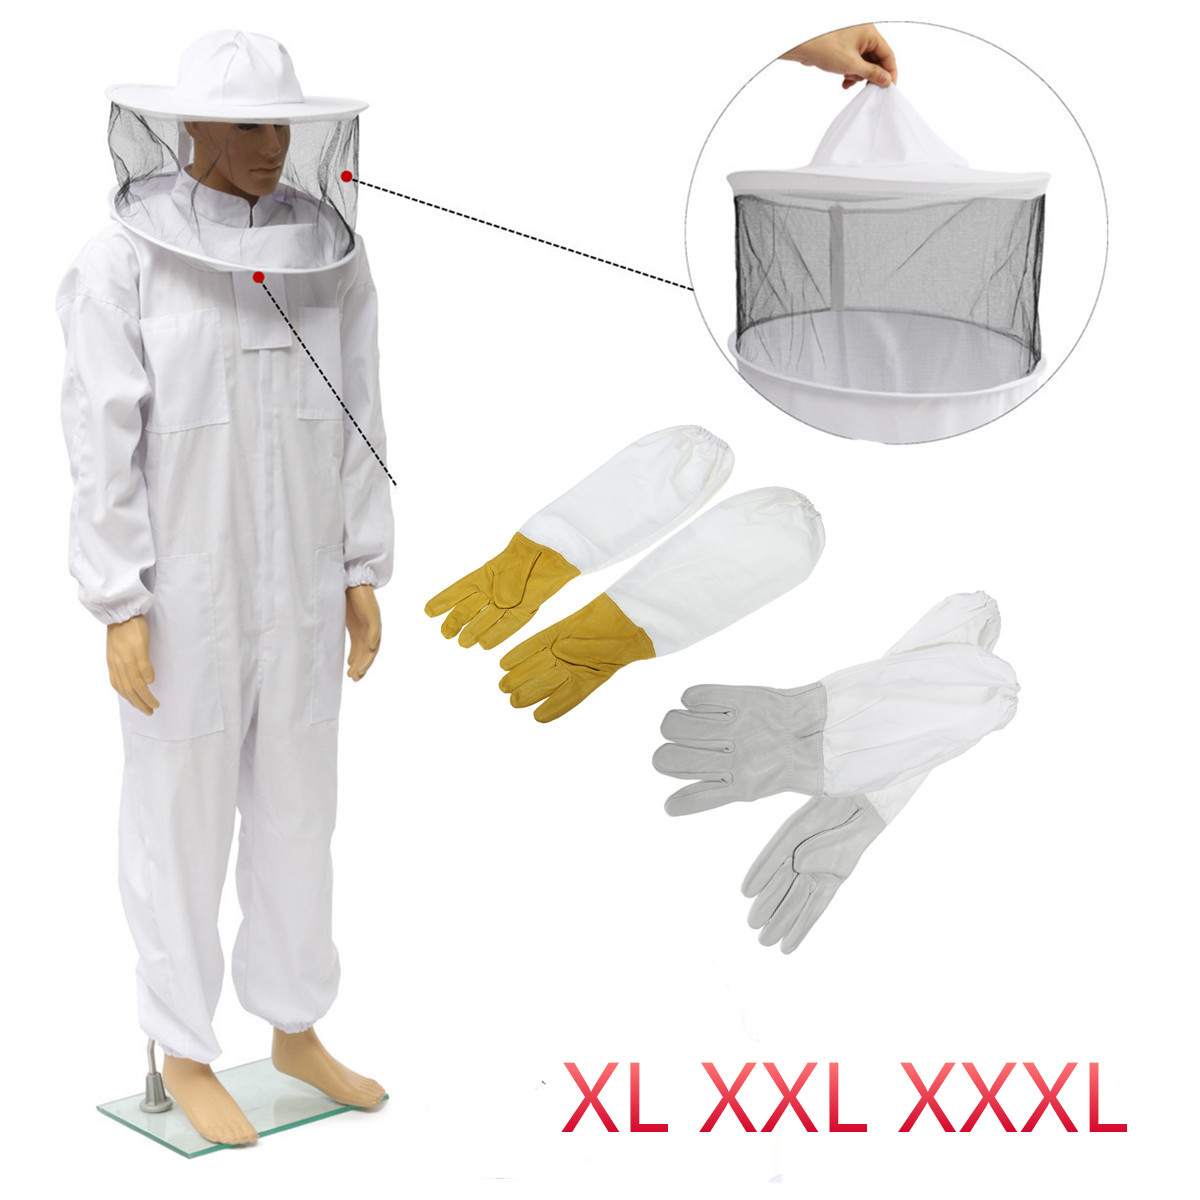 Beekeepers Bee Keeping Cotton Full Protector Suit With Veil Hat Hood Bee Suit XL XXL XXL 82